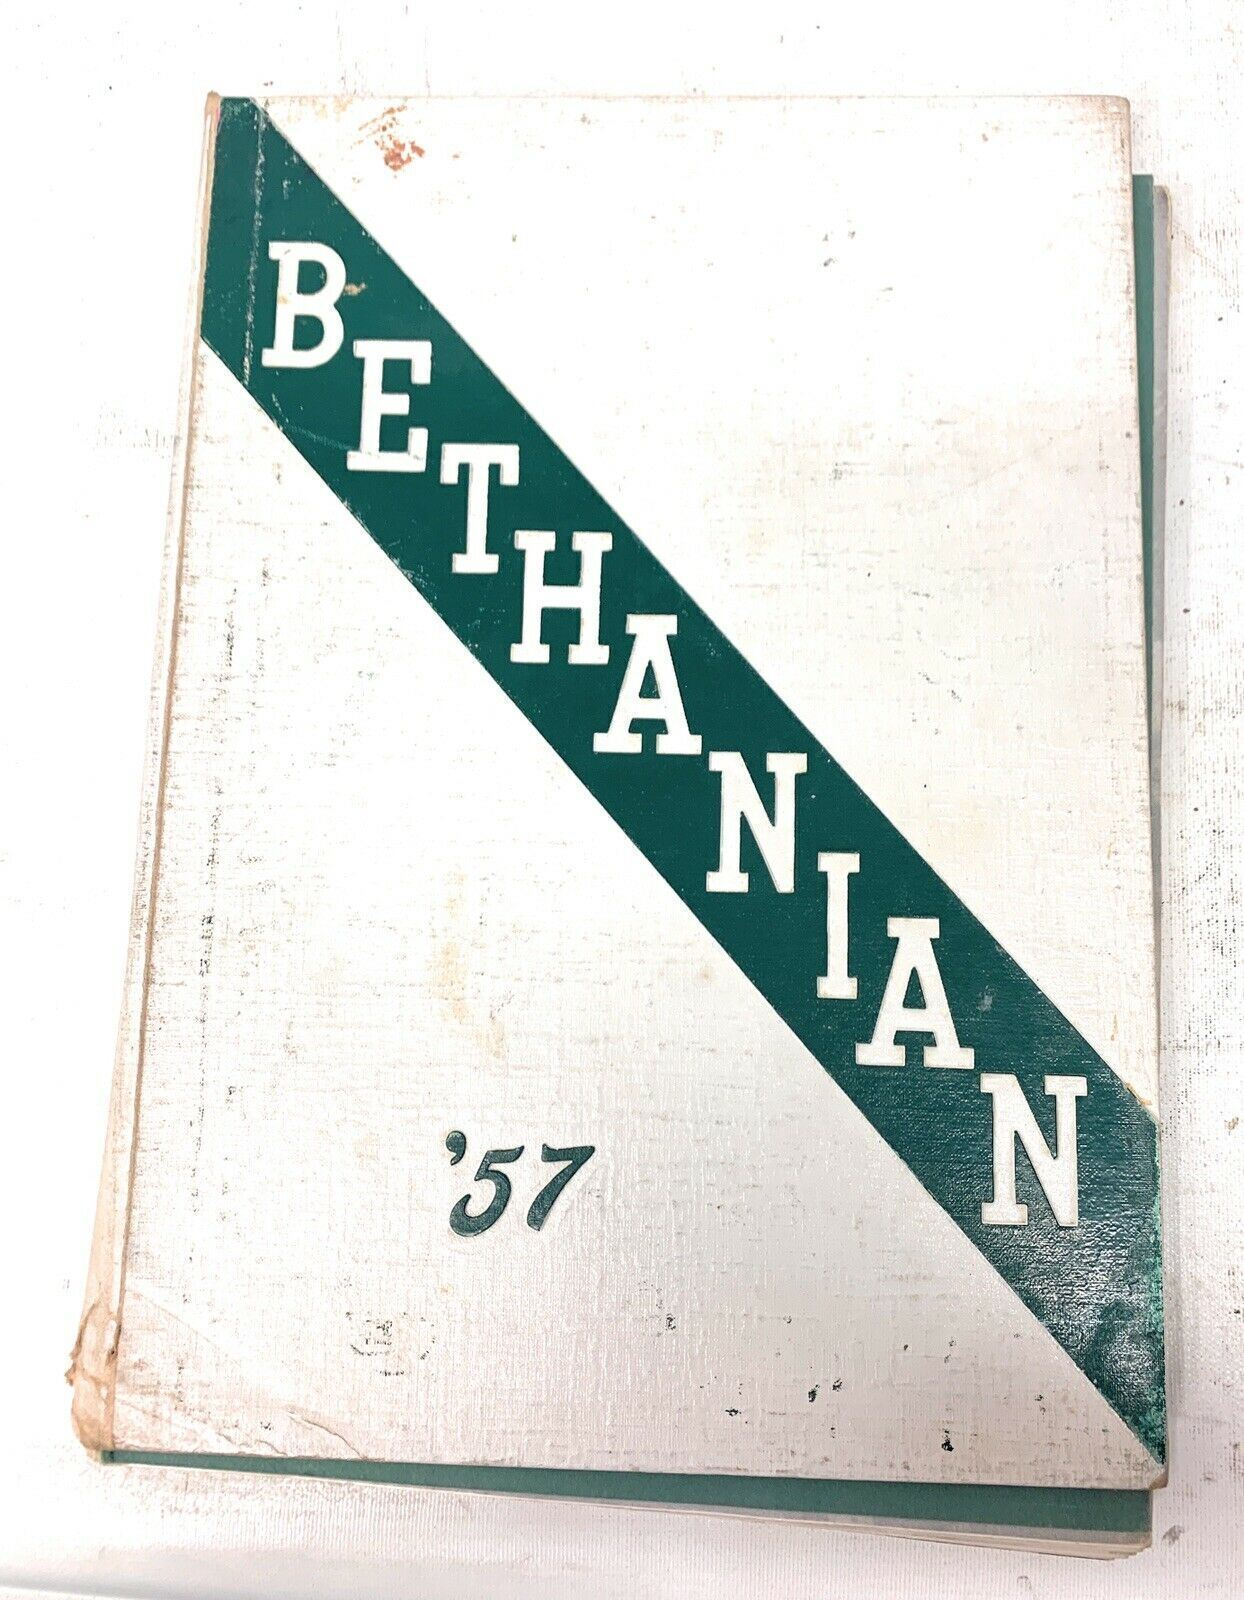 1957 BETHANIAN COLLEGE YEARBOOK